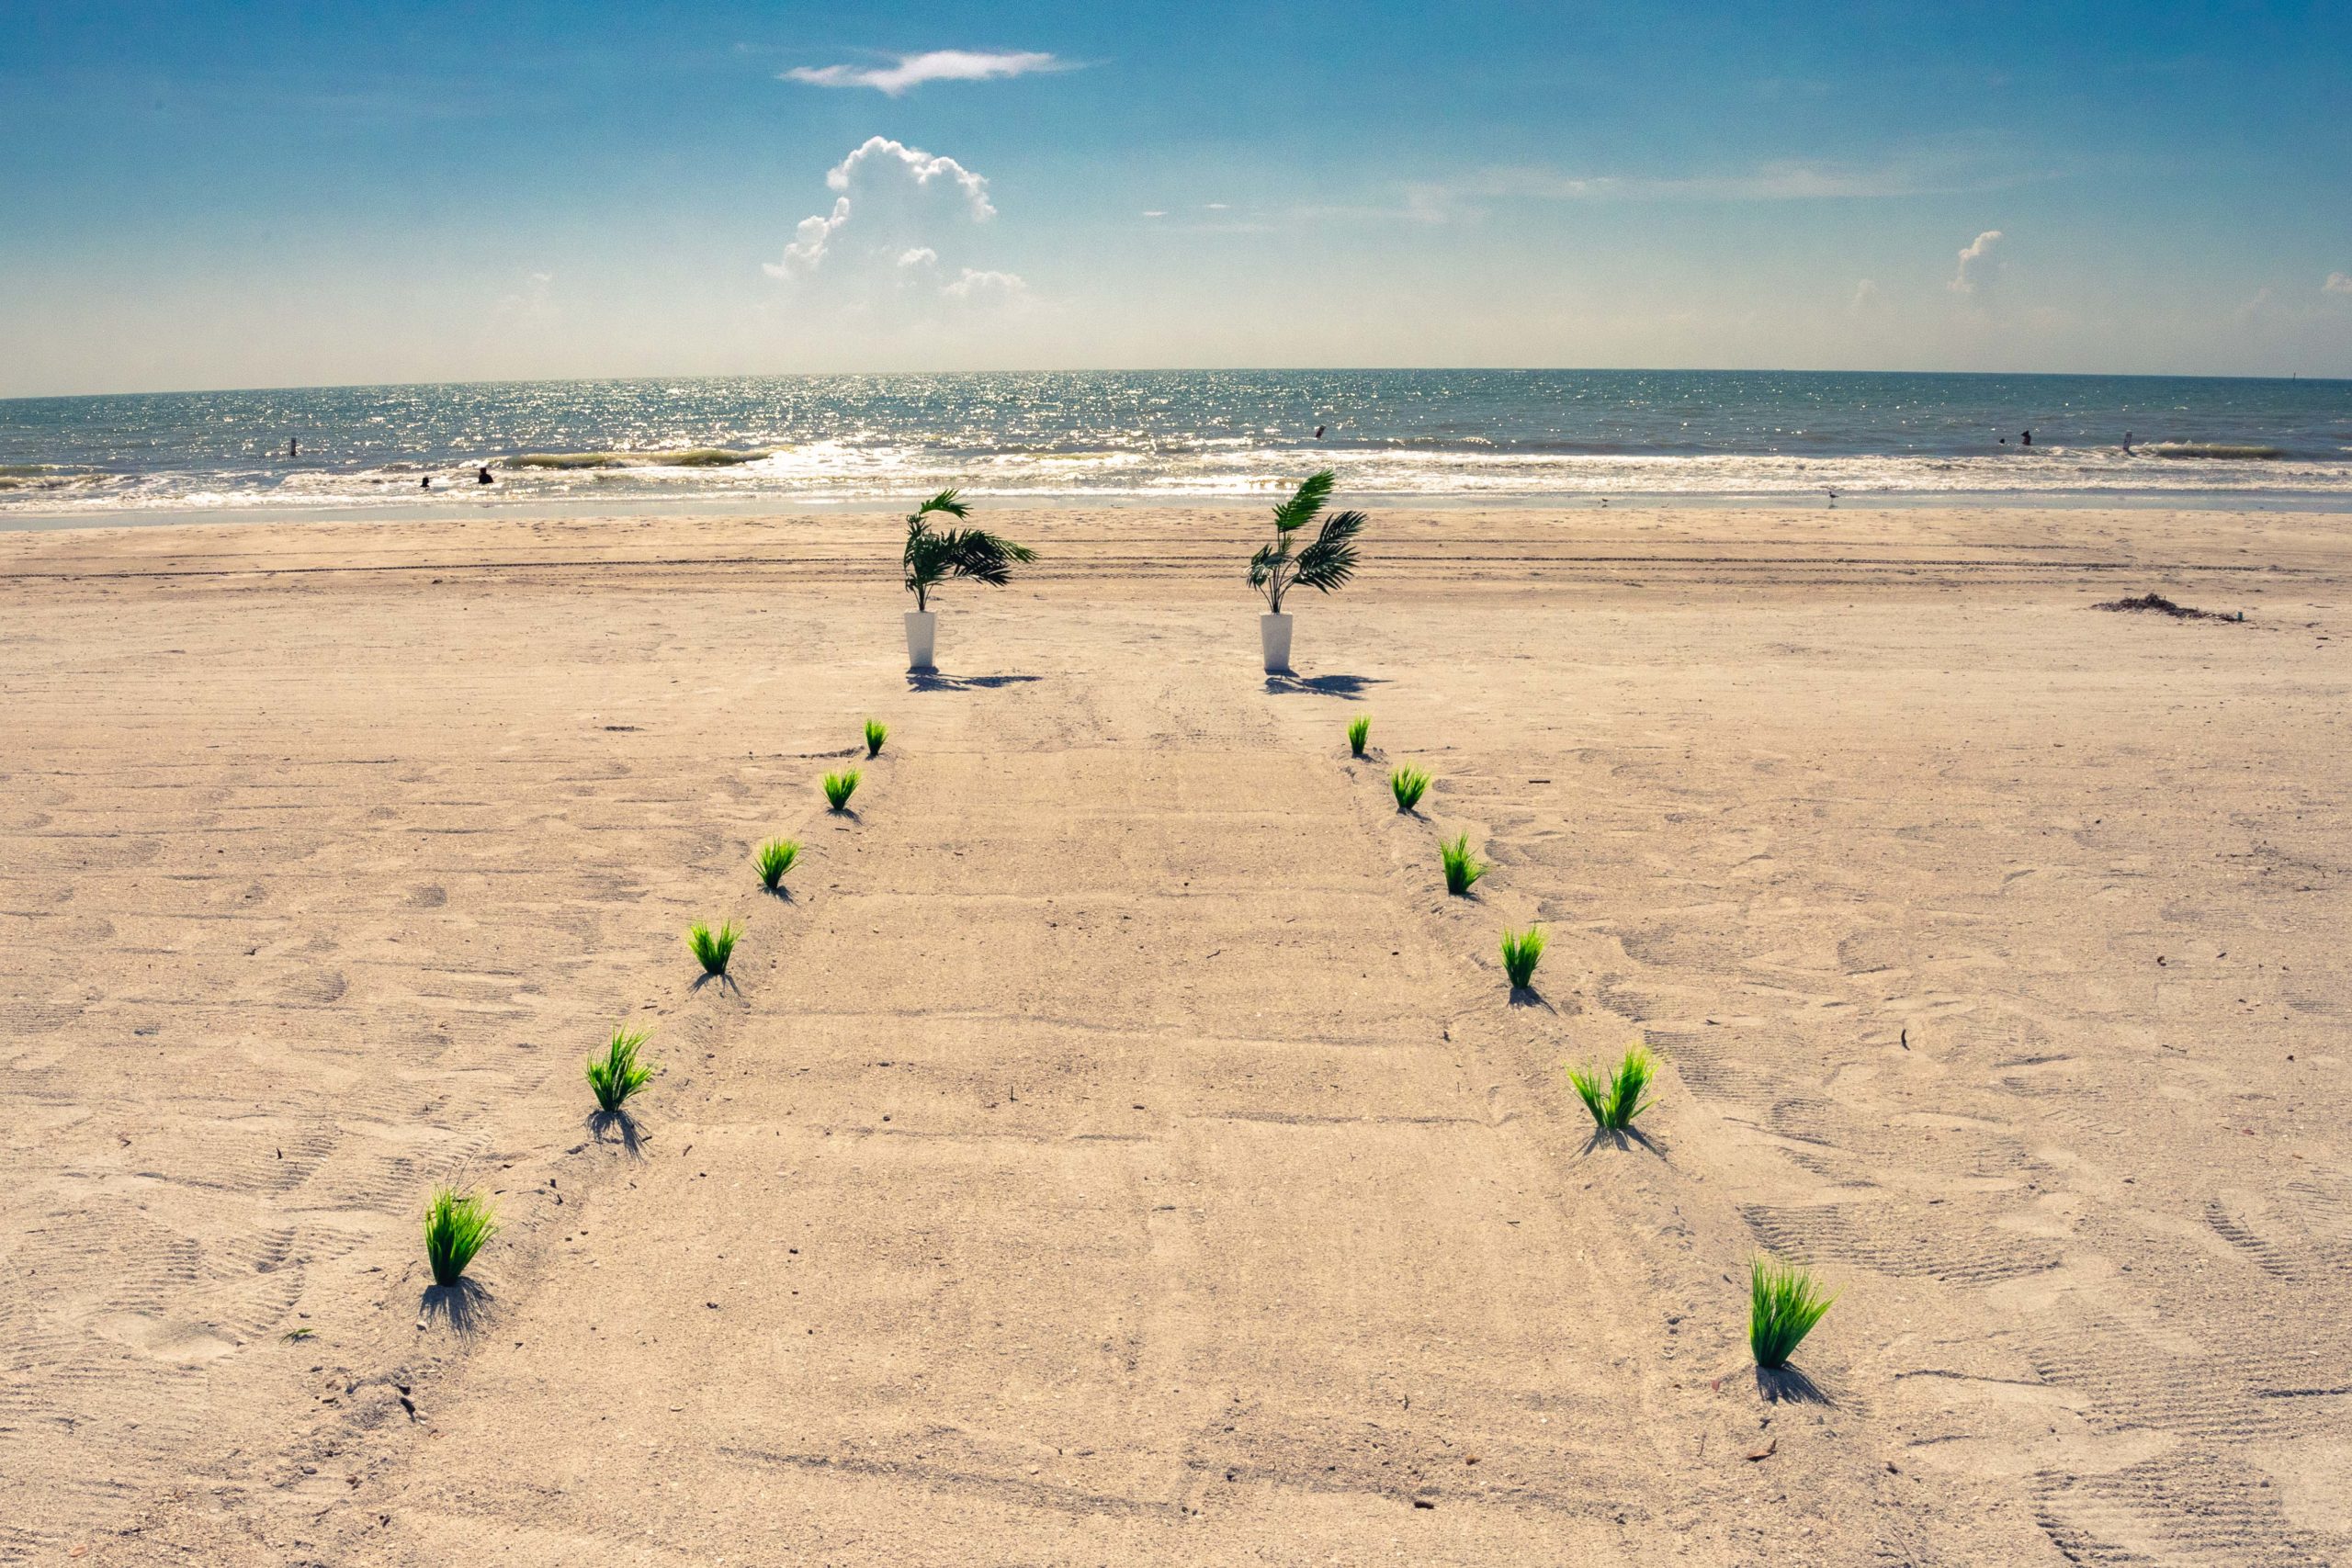 Raised walkway on the beach buffered by sea grass. At the end of the aisle are two potted palms with the Gulf in the background.